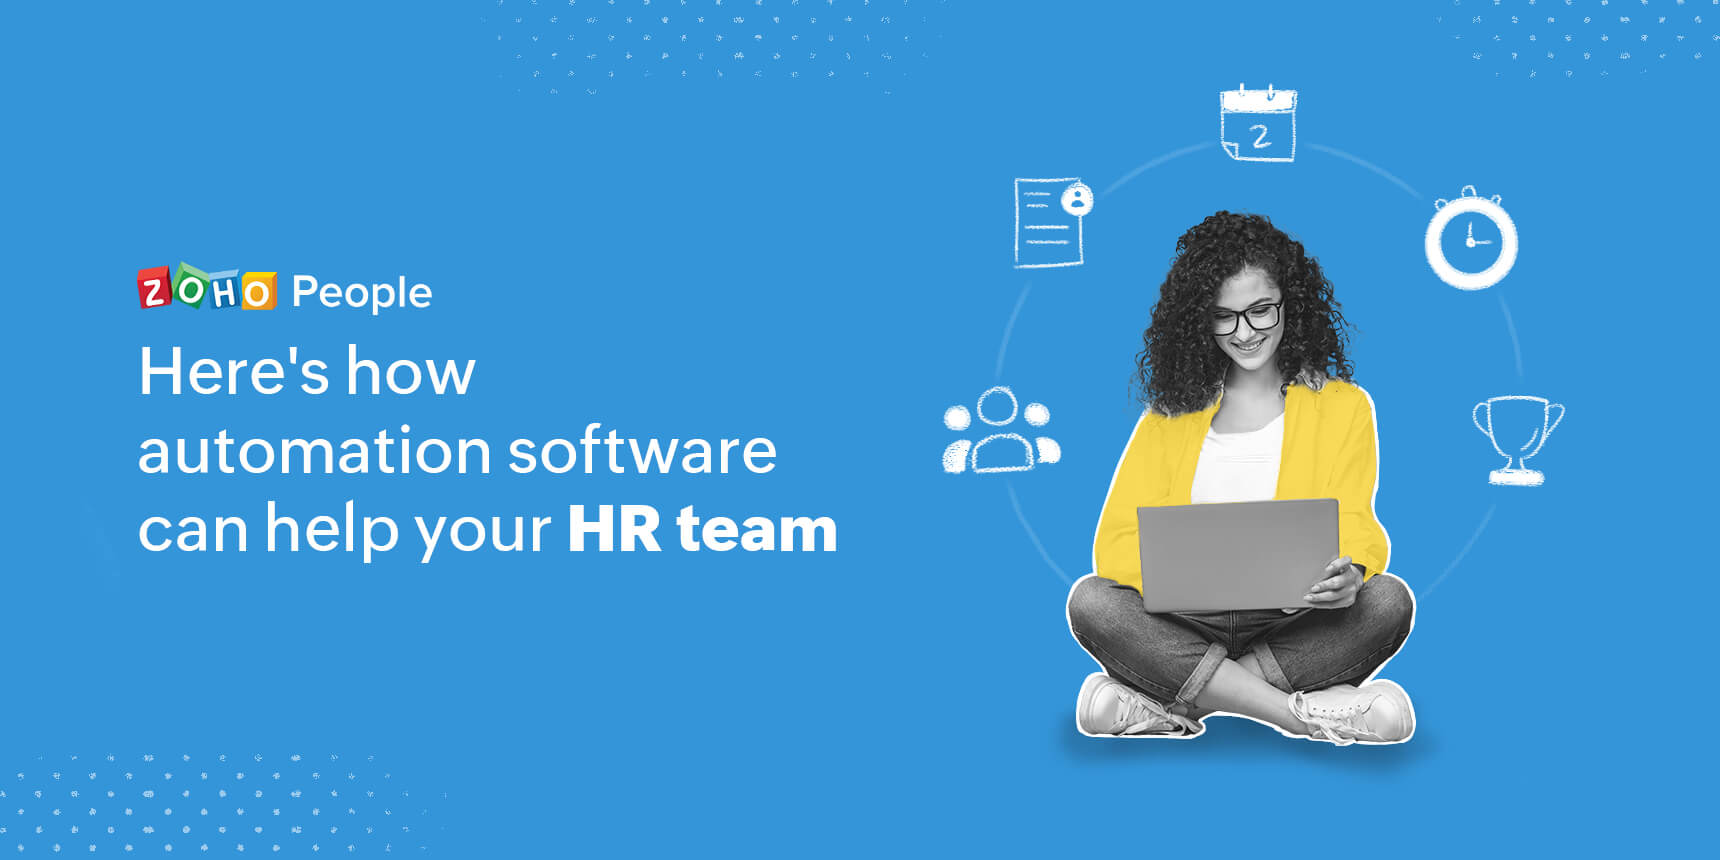 How can HR automation software help HR teams